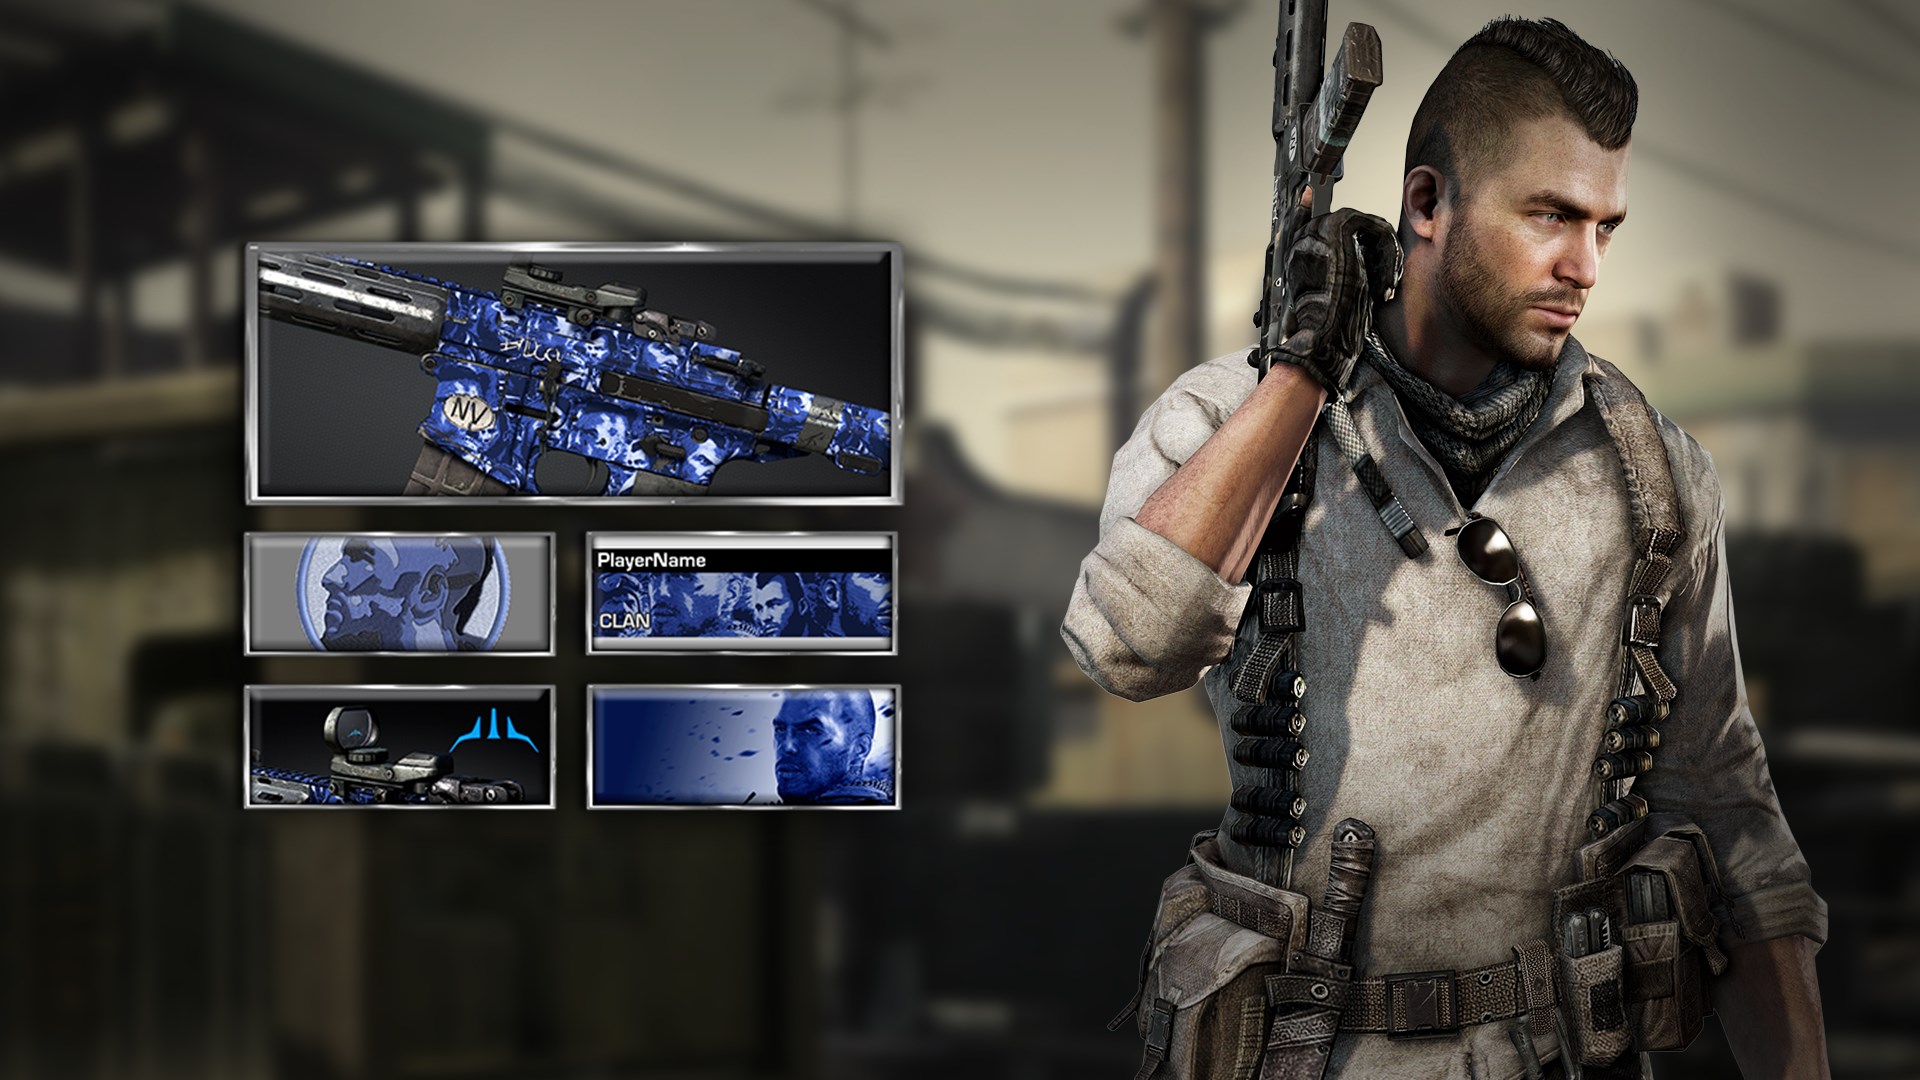 Buy Call of Duty®: Ghosts - Squad Pack - Extinction